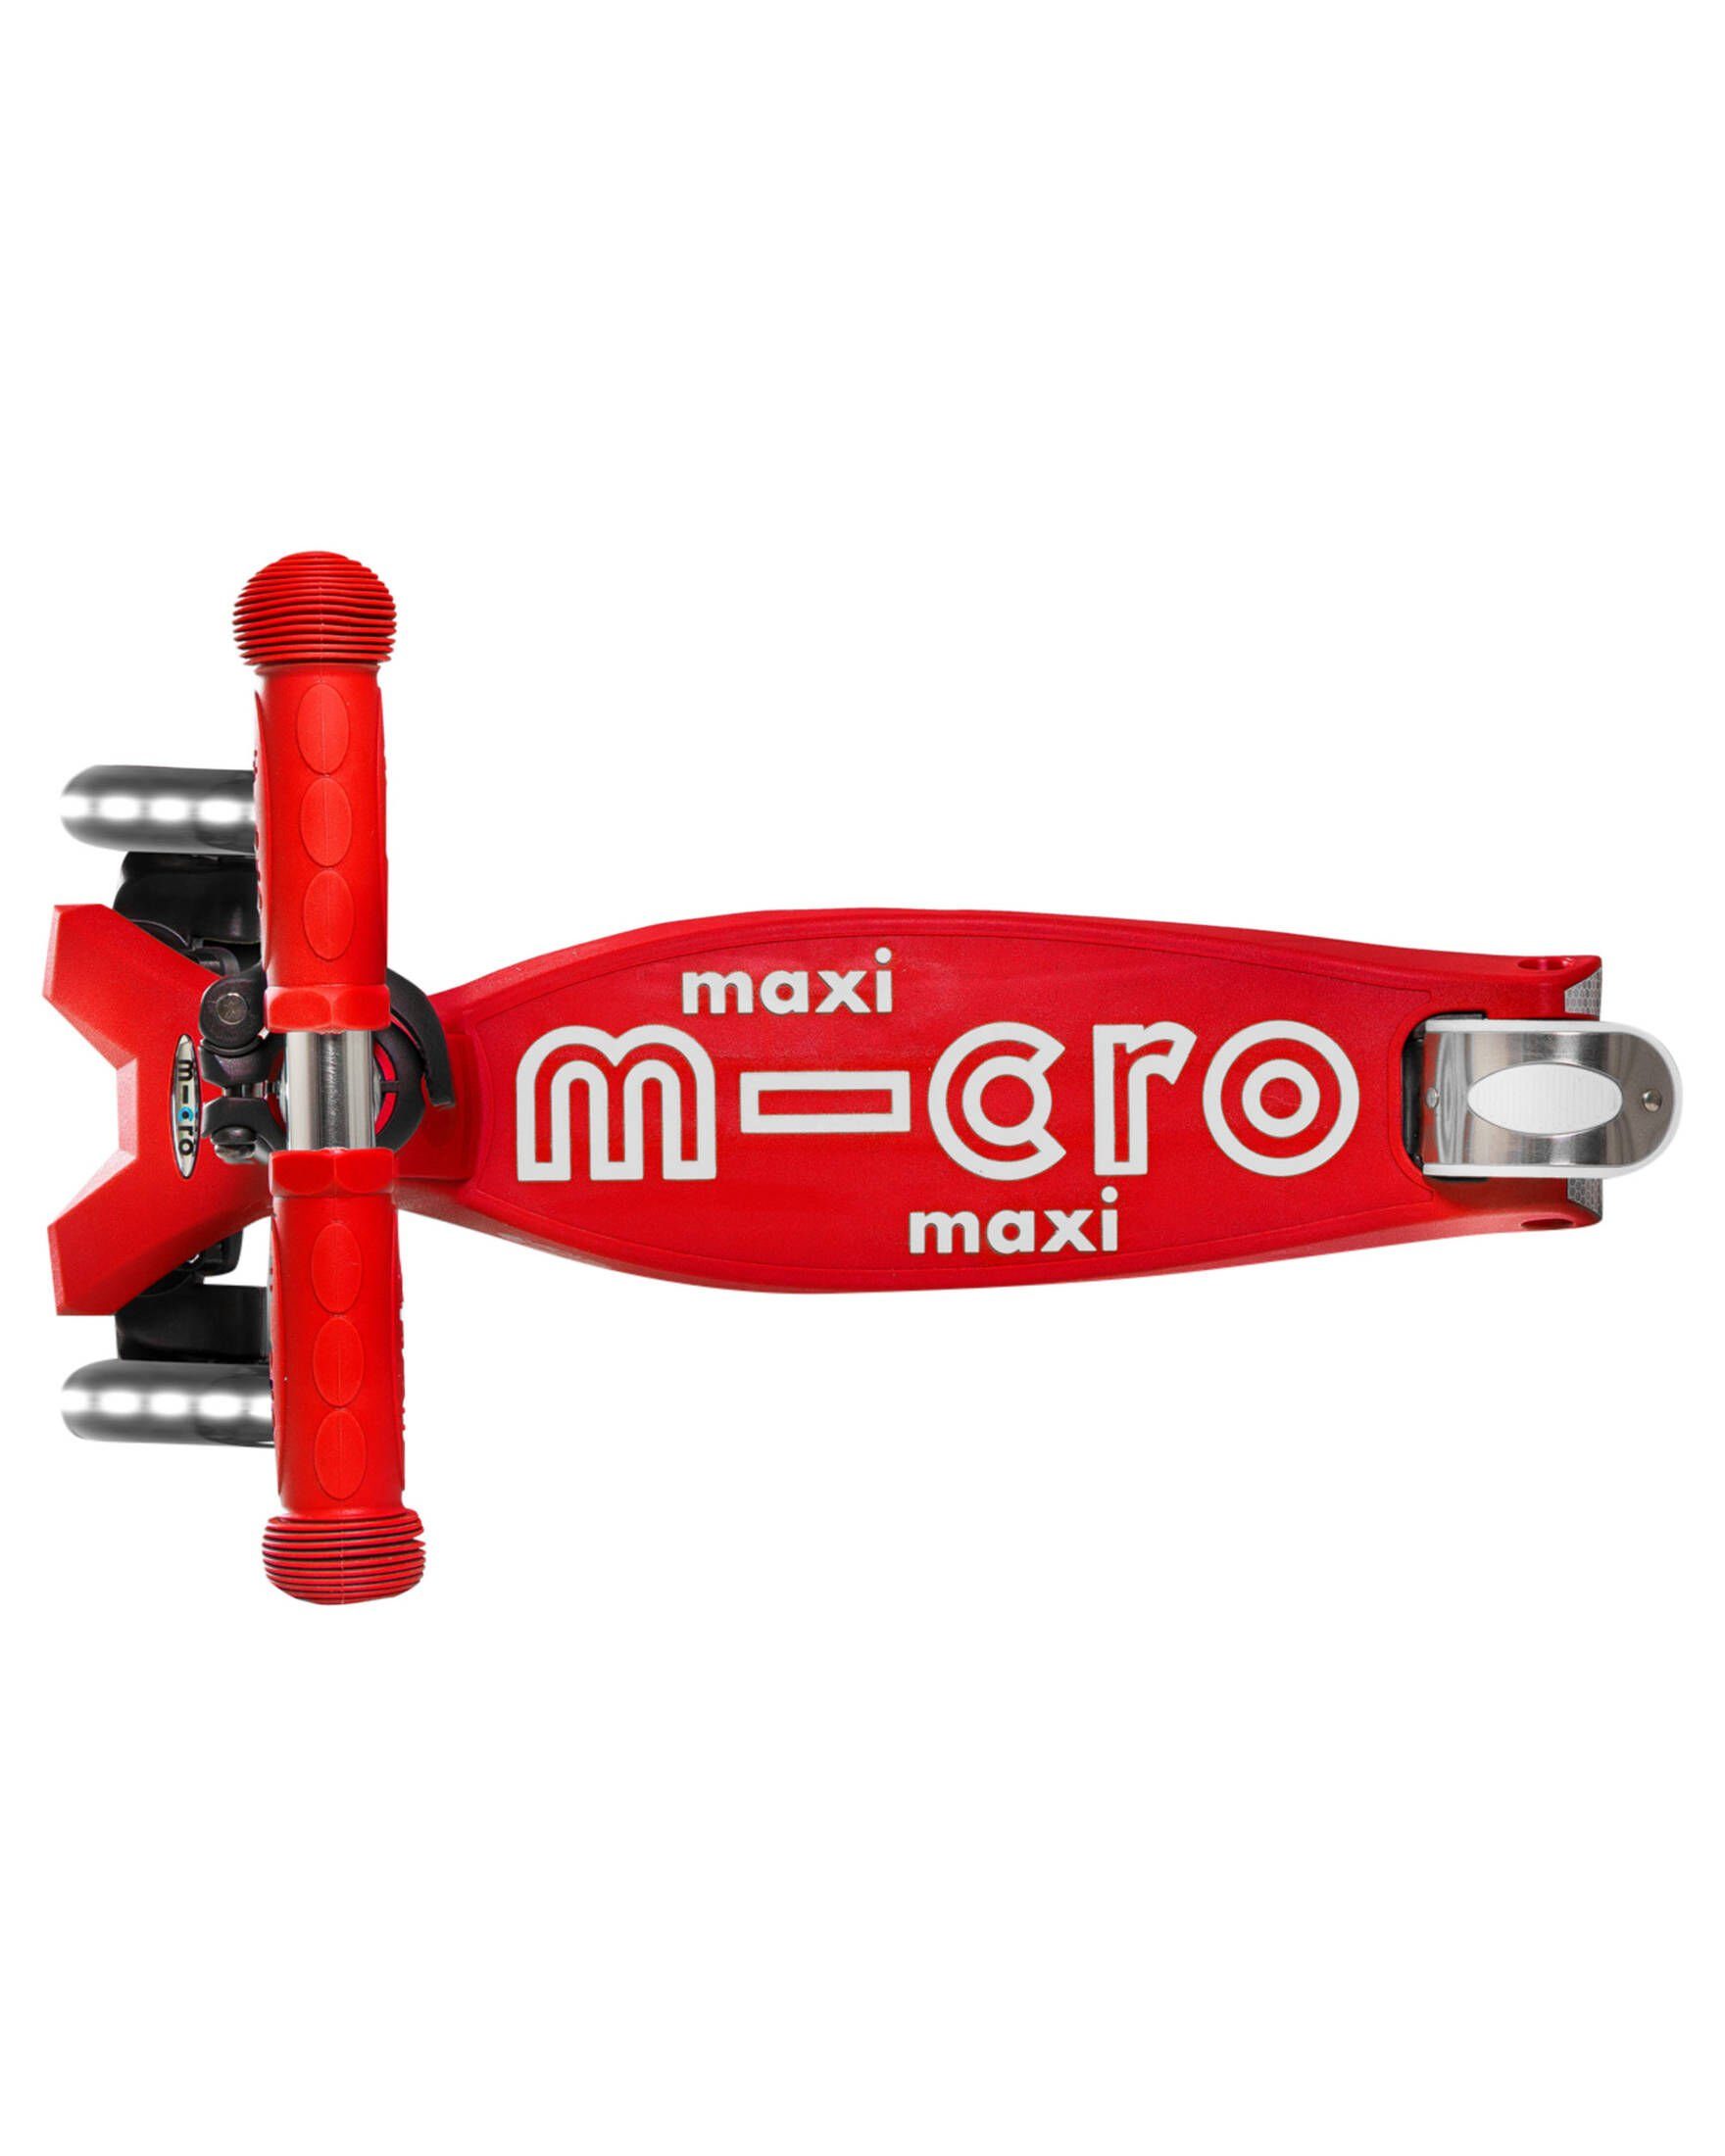 DELUXE LED, Roller MAXI Tretroller Kinder Micro (1 tlg) MICRO